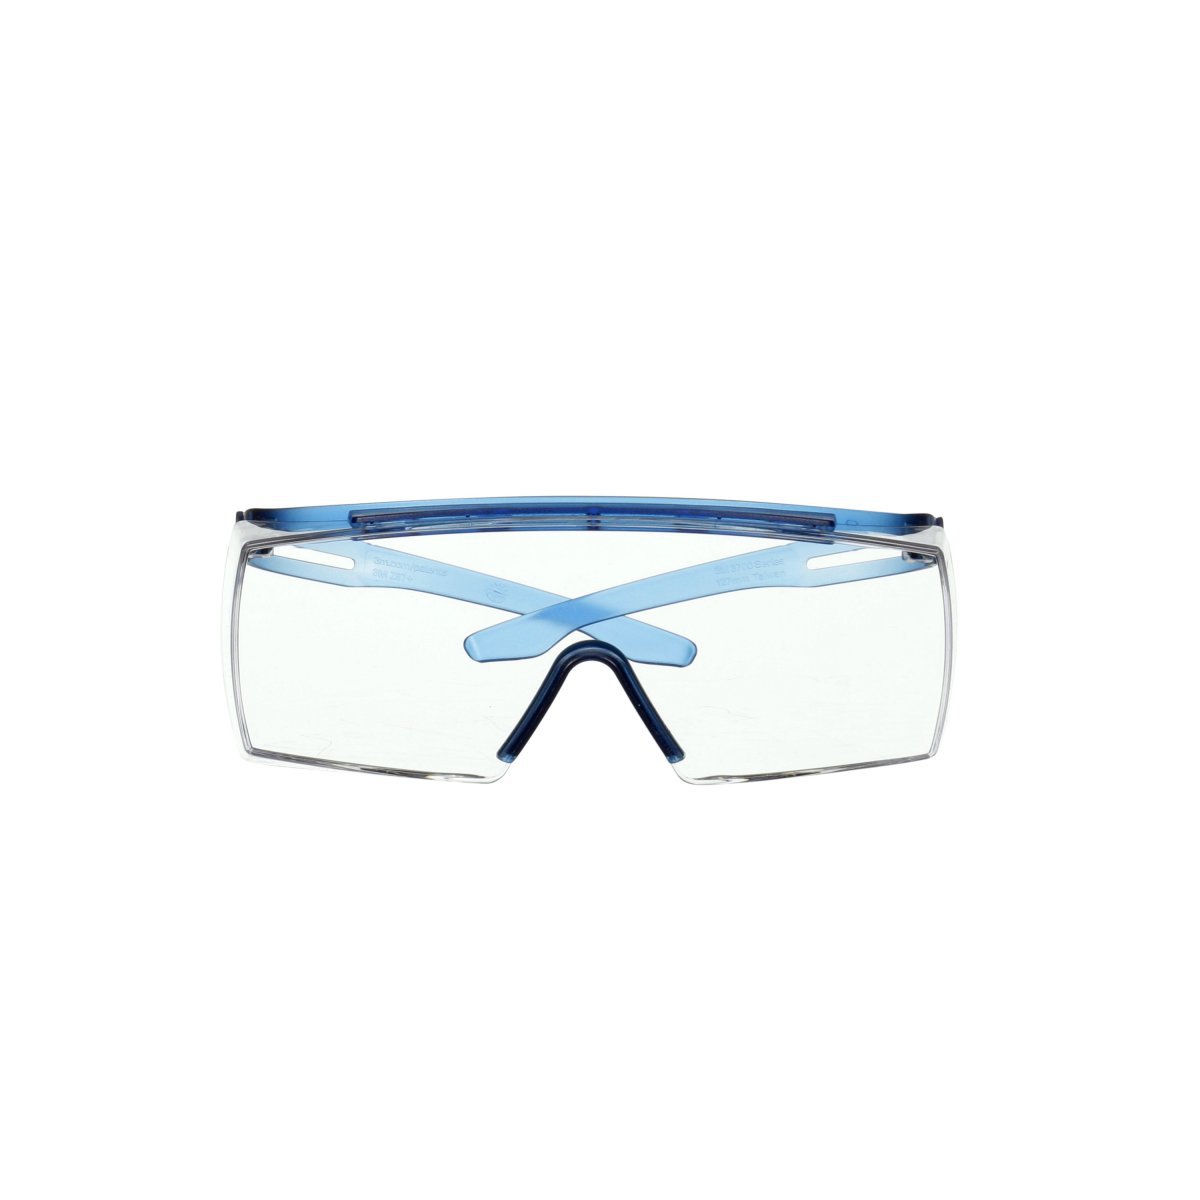 3M™ SecureFit™ 3700 Series Over The Glasses Frameless Safety Glasses With Clear Scotchgard™ Polycarbonate Anti-Fog Lens And Blue